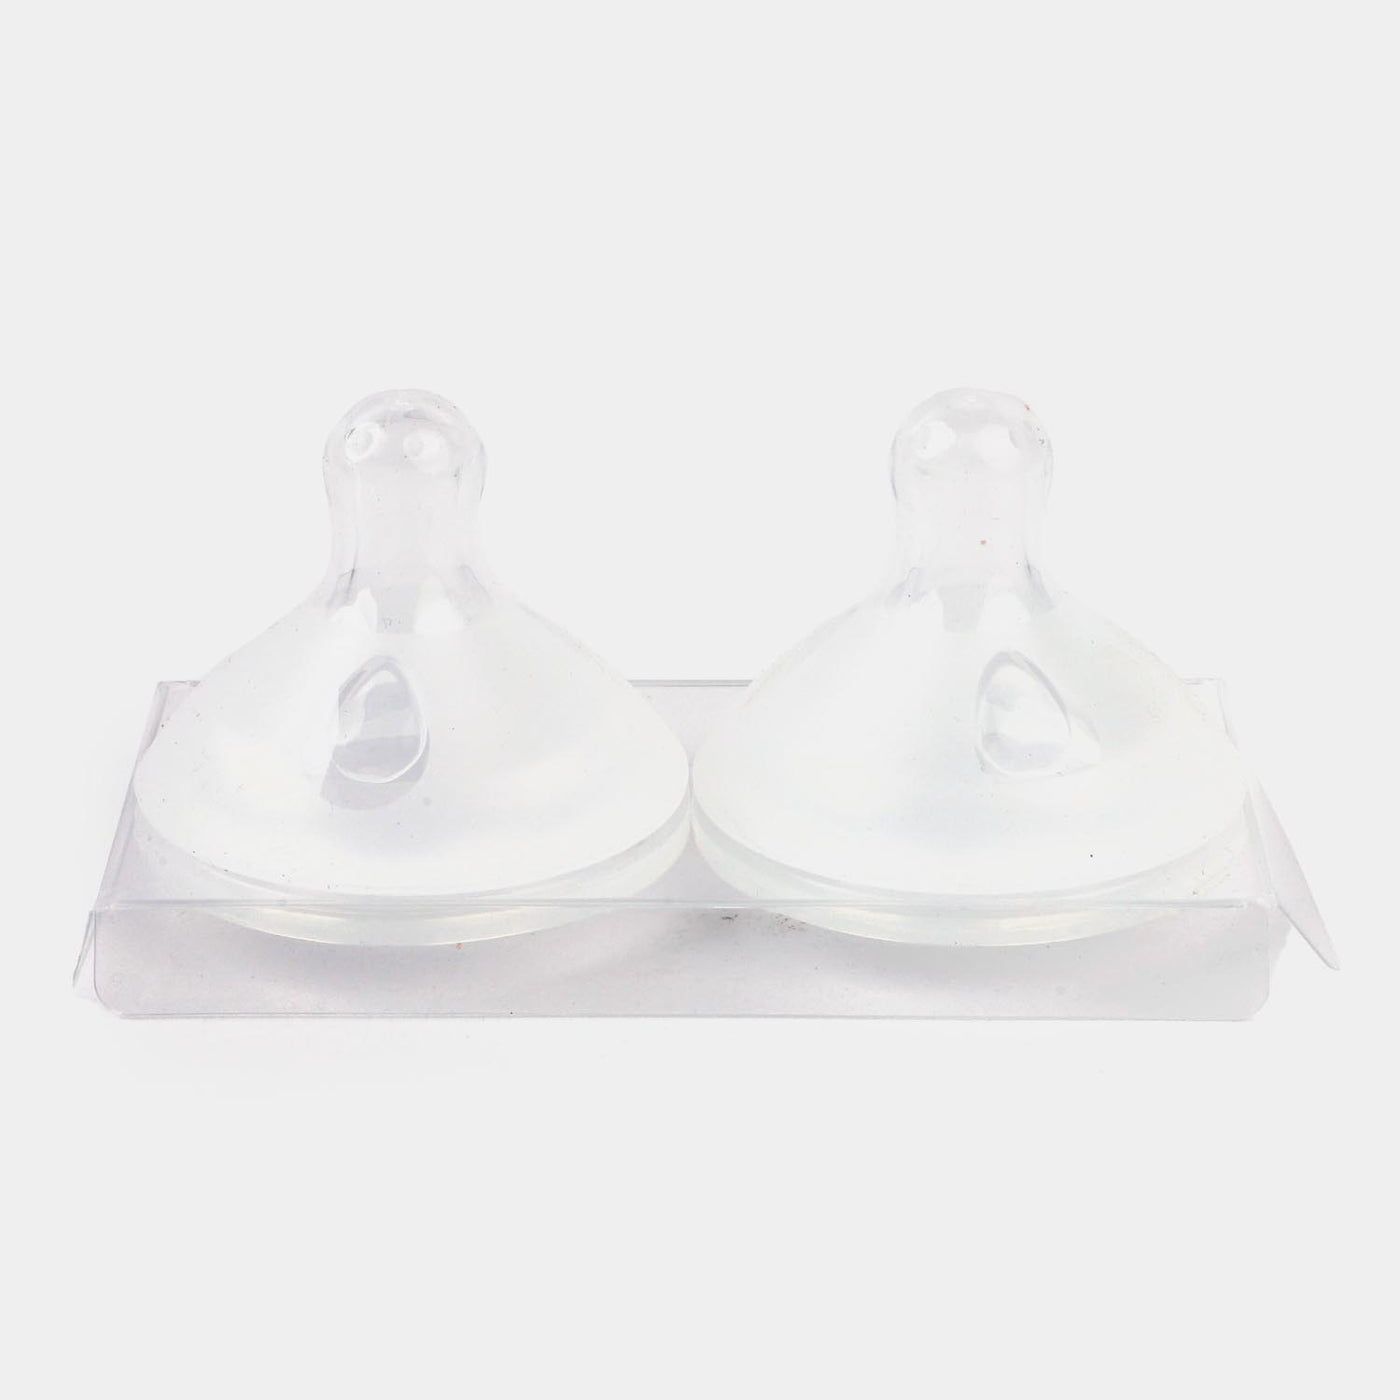 ROOTS ANTI-COLIC WIDE NECK NIPPLE - PACK OF 2 | 3 M+